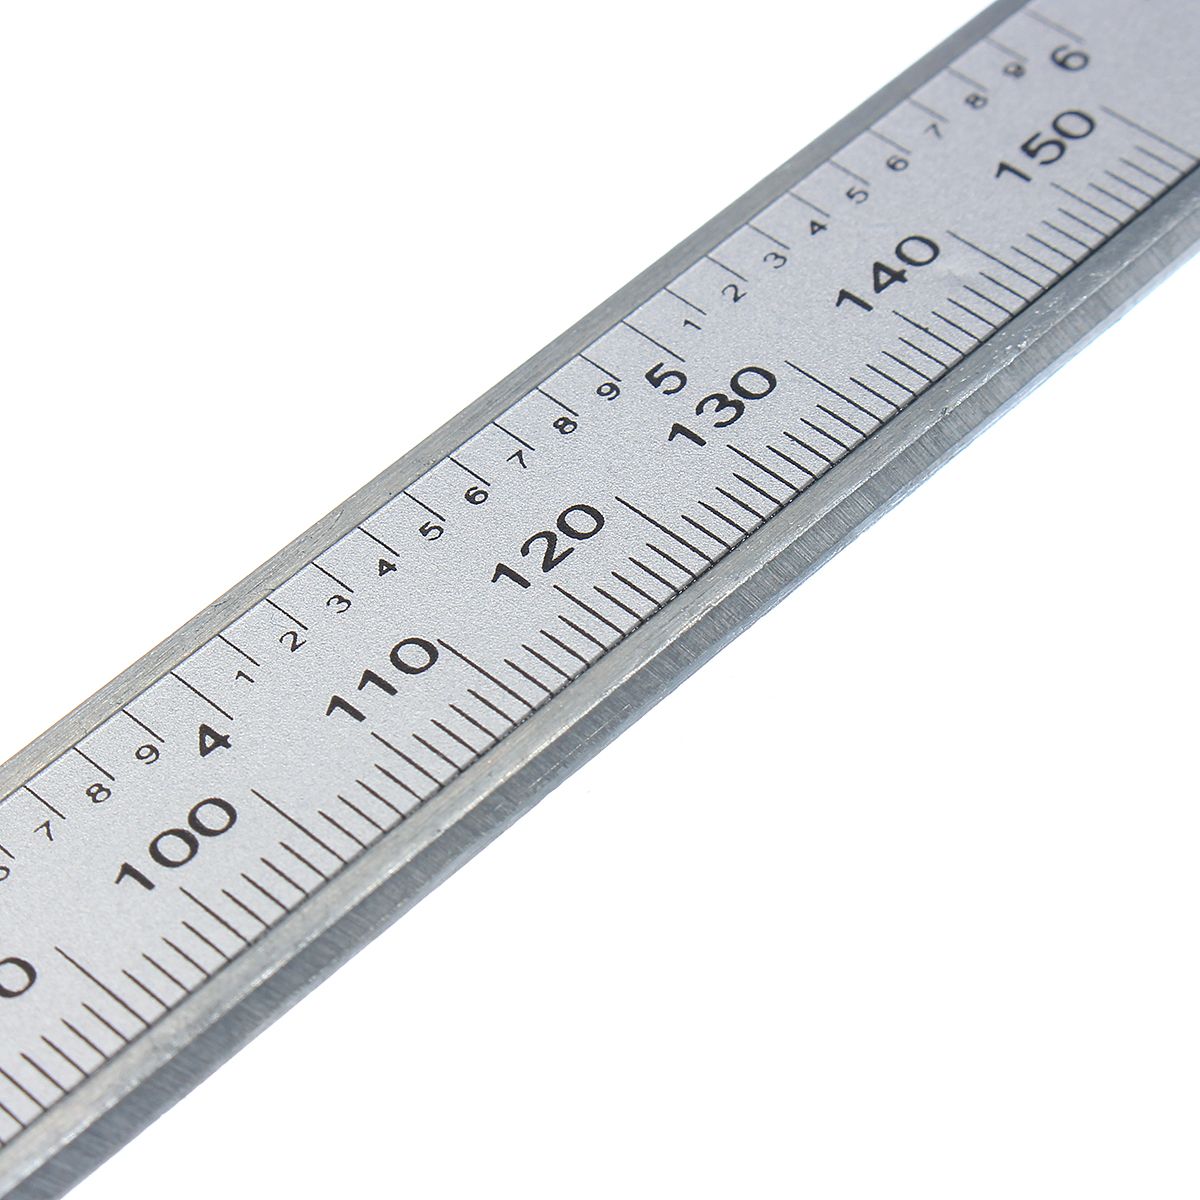 Digital-Caliper-LCD-Stainless-Electronic-Ruler-Micrometer-Measuring-0-6inch-150mm-1263657